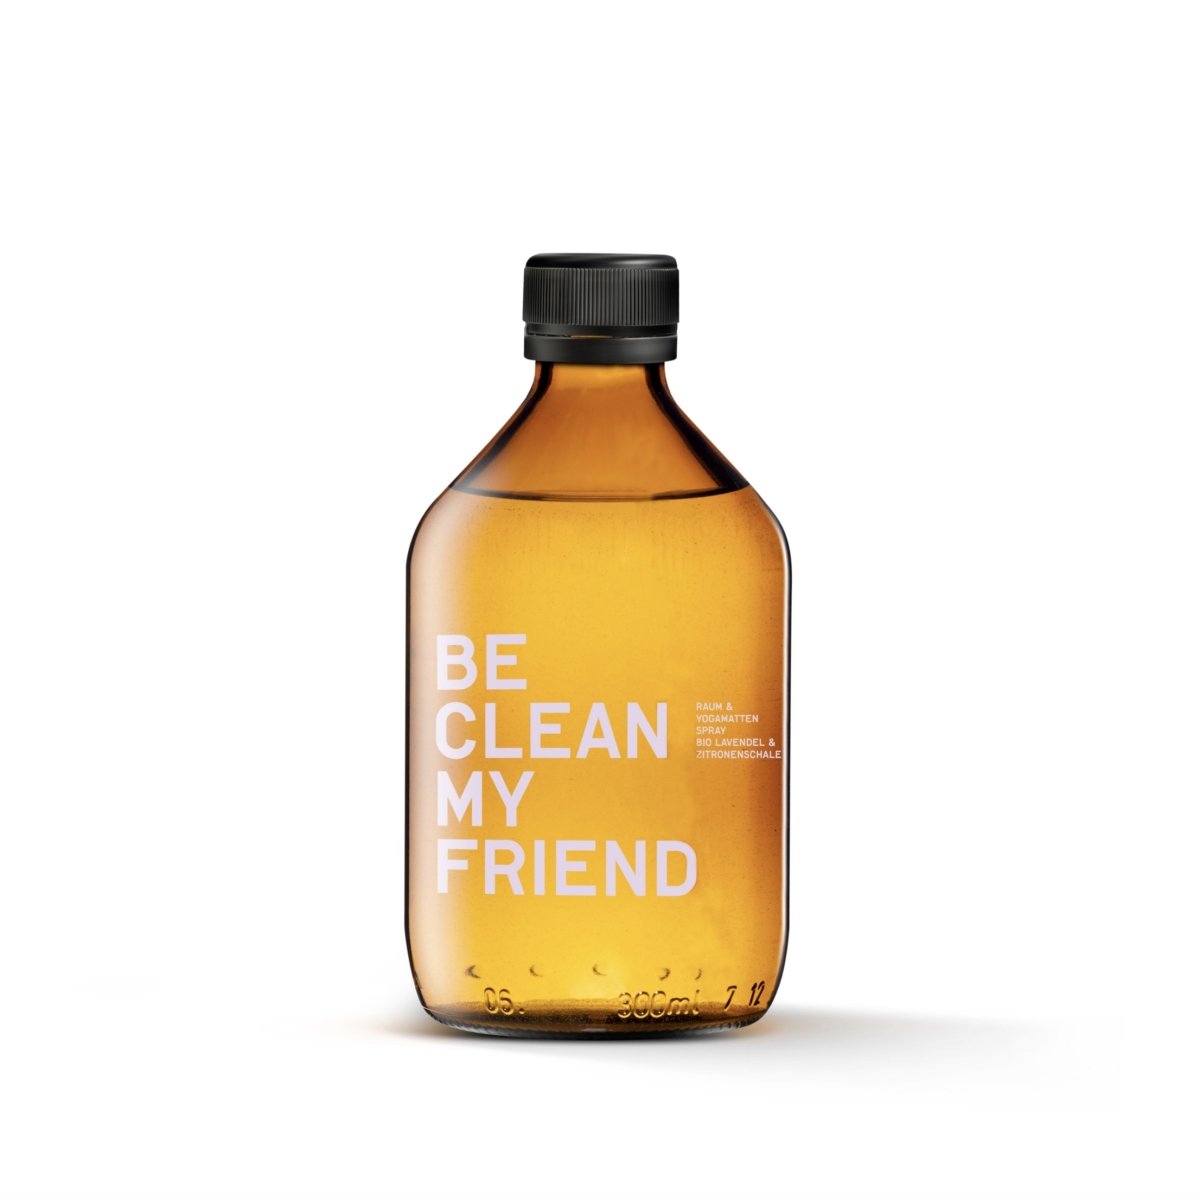 Be (CLEAN) My Friend - Room and Yoga Mat Spray REFILL 300ml - Homebody Denver